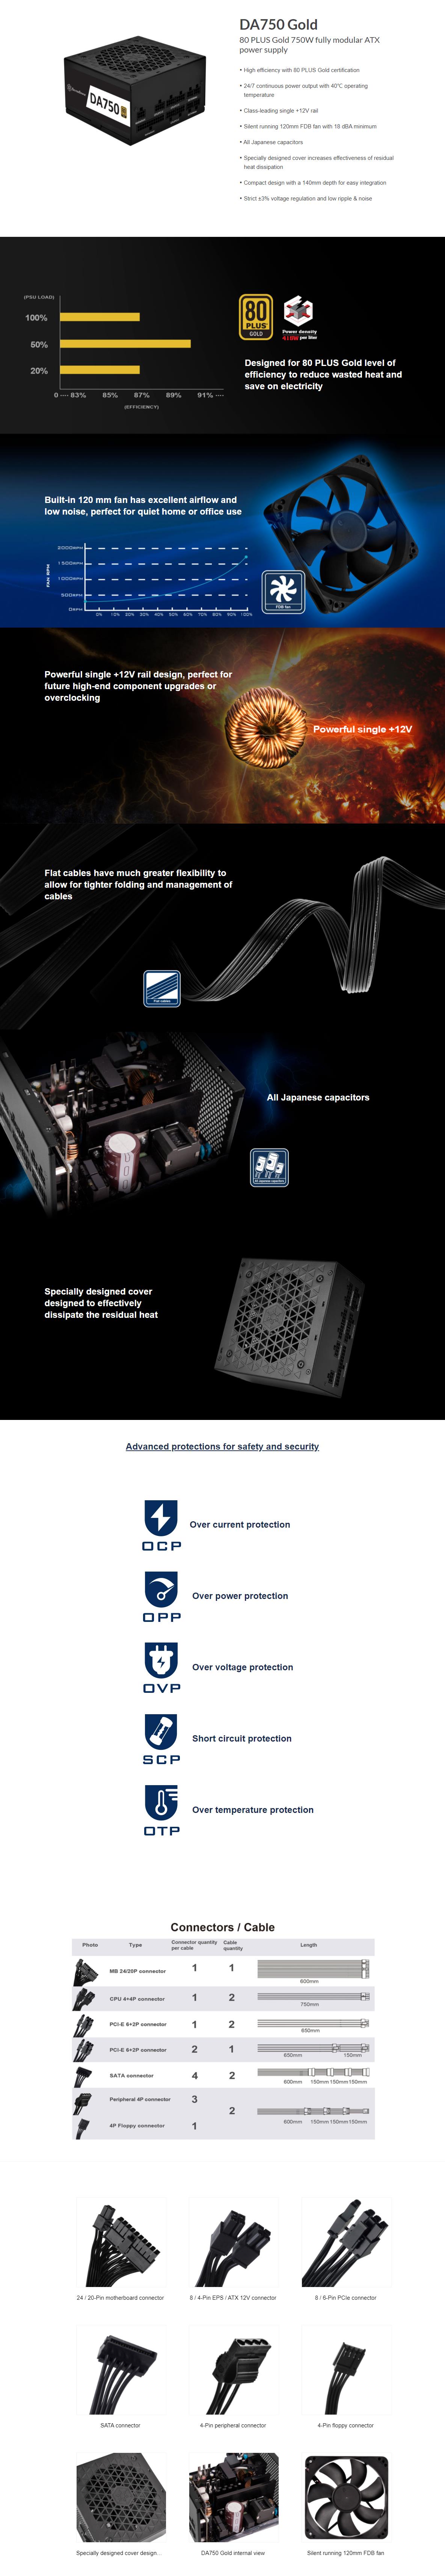 A large marketing image providing additional information about the product SilverStone DA750-G 750W Gold ATX Modular PSU - Additional alt info not provided